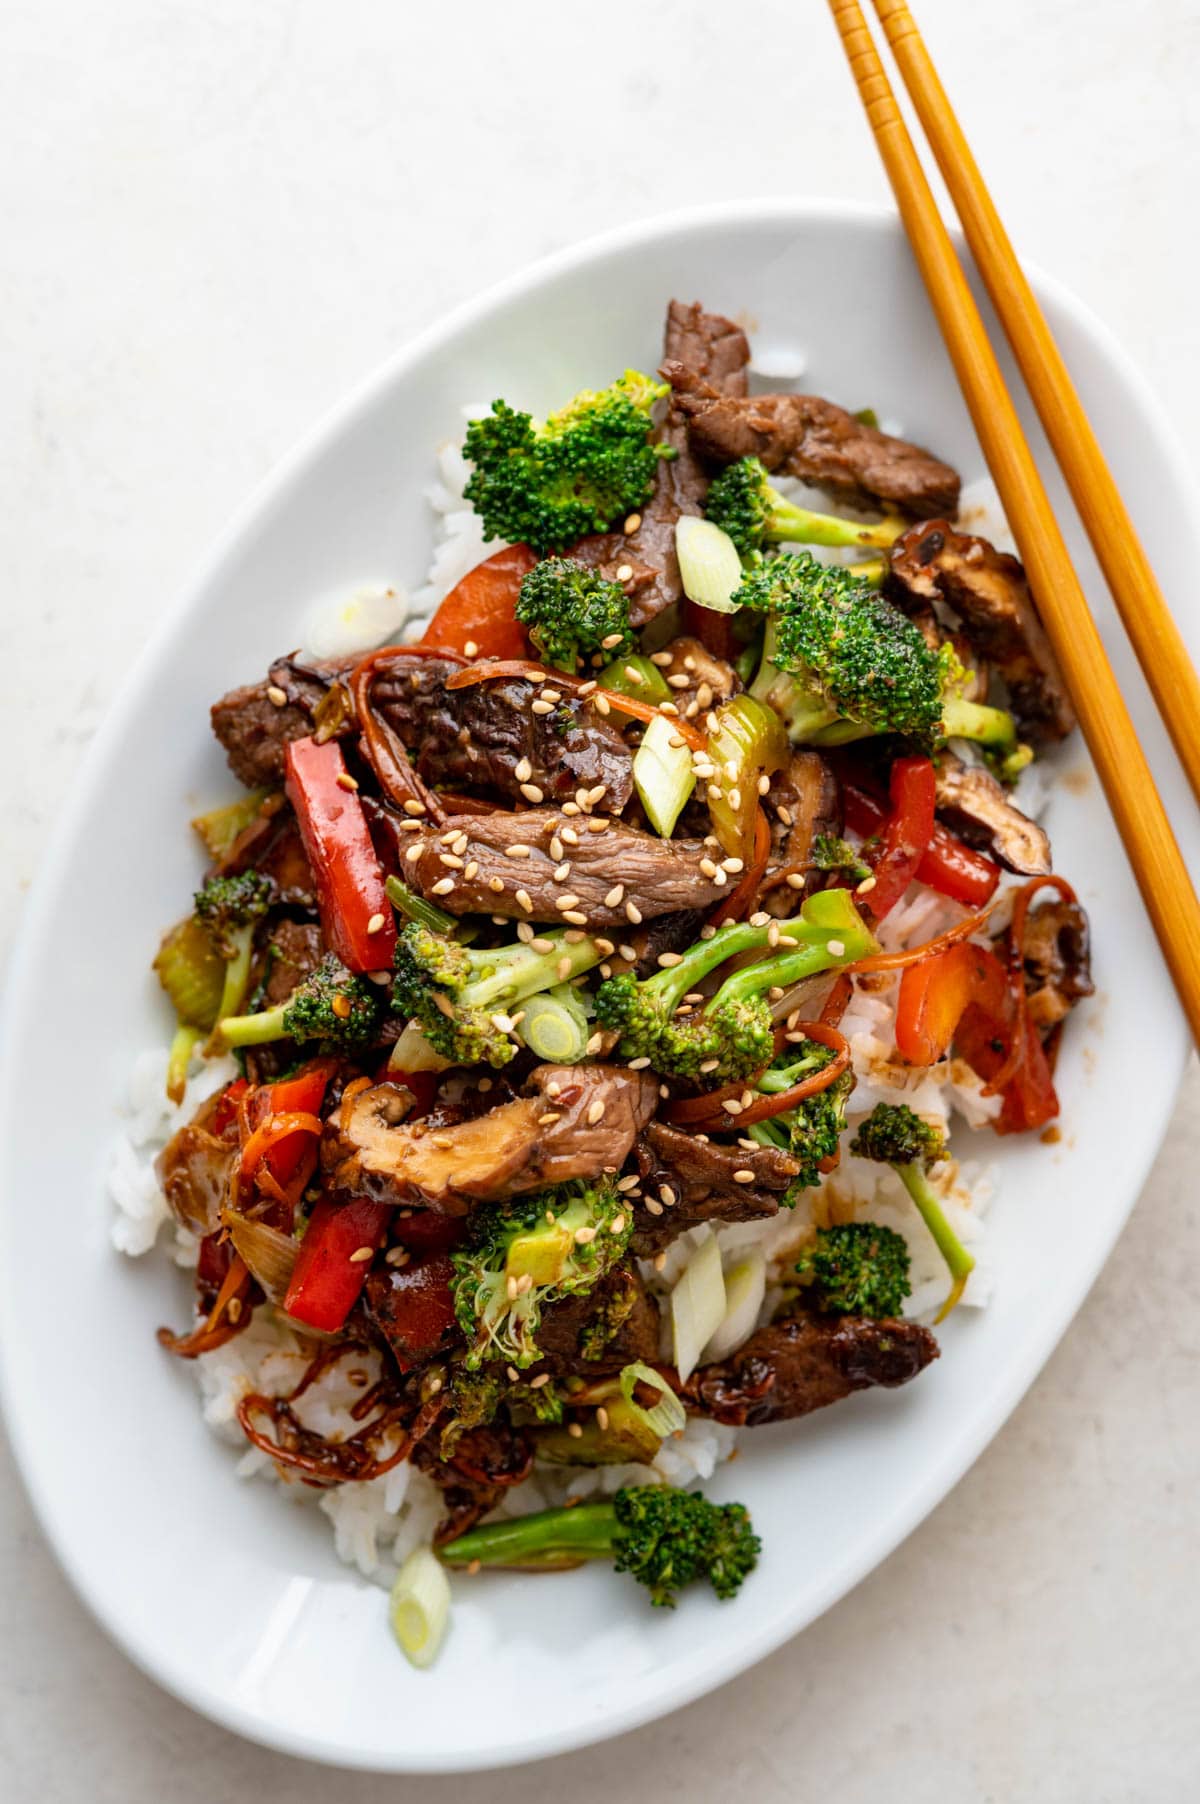 Beef and broccoli with red peppers on a platter with chop sticks